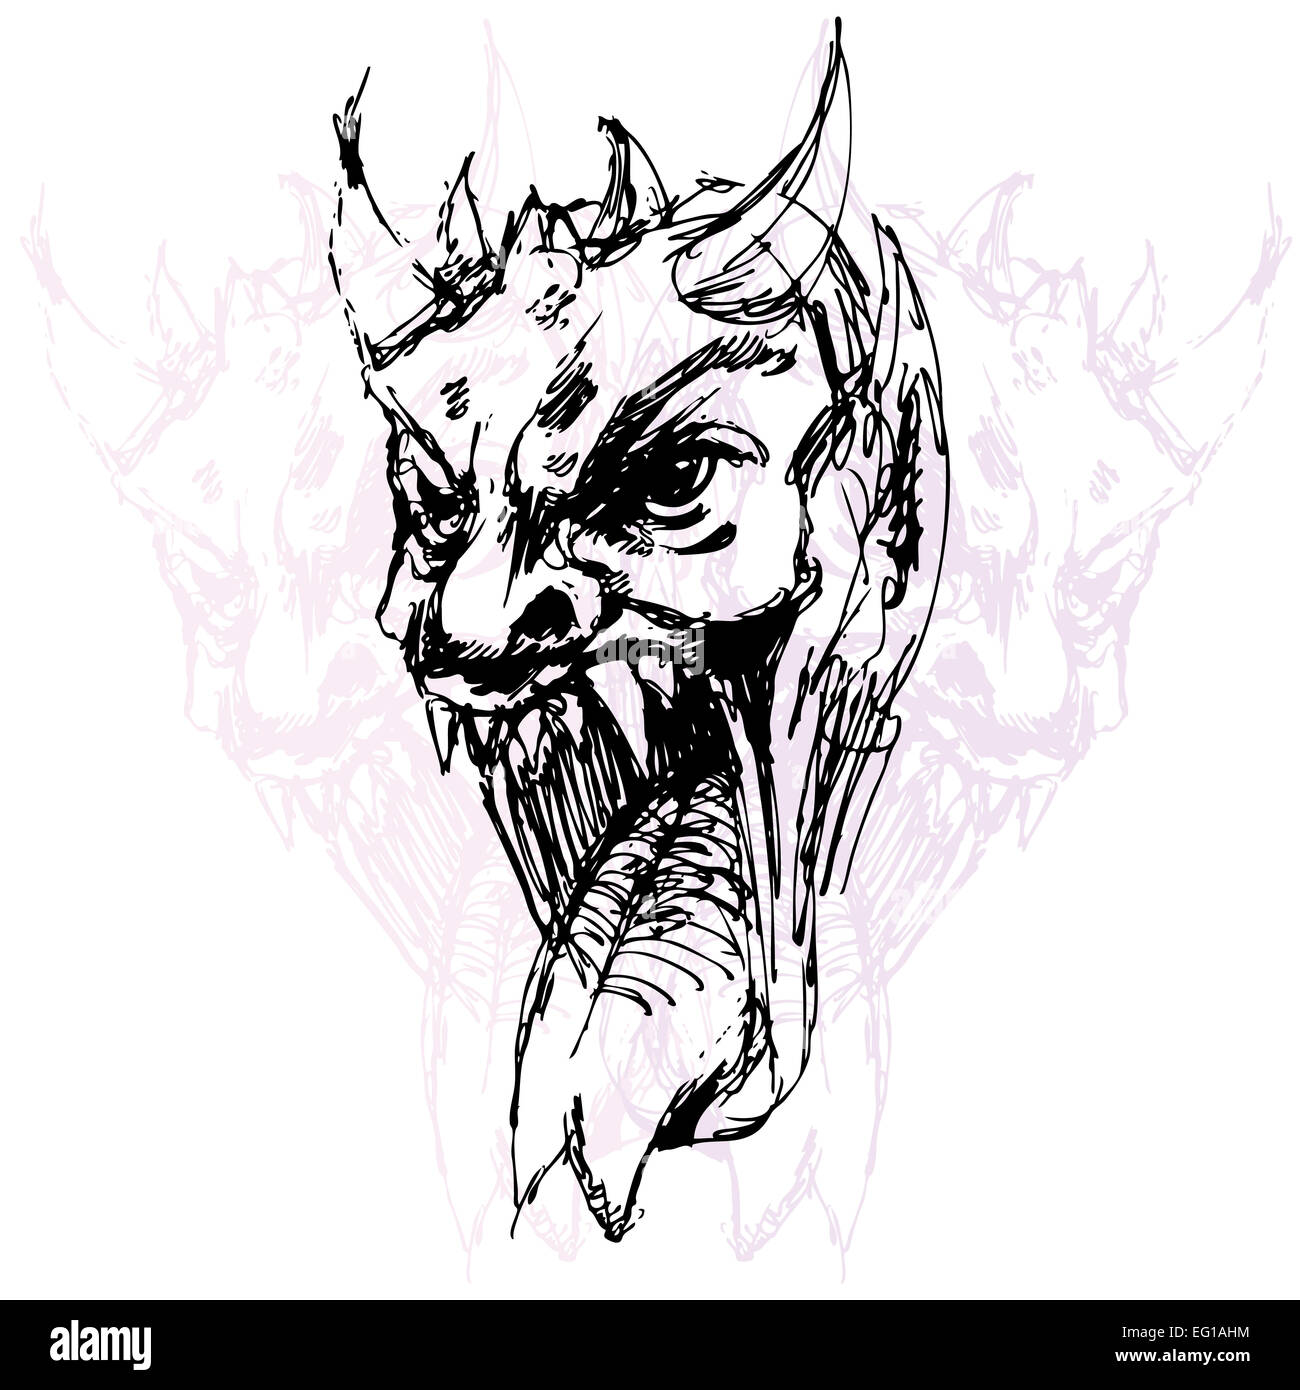 An image of a demon face drawing Stock Photo - Alamy